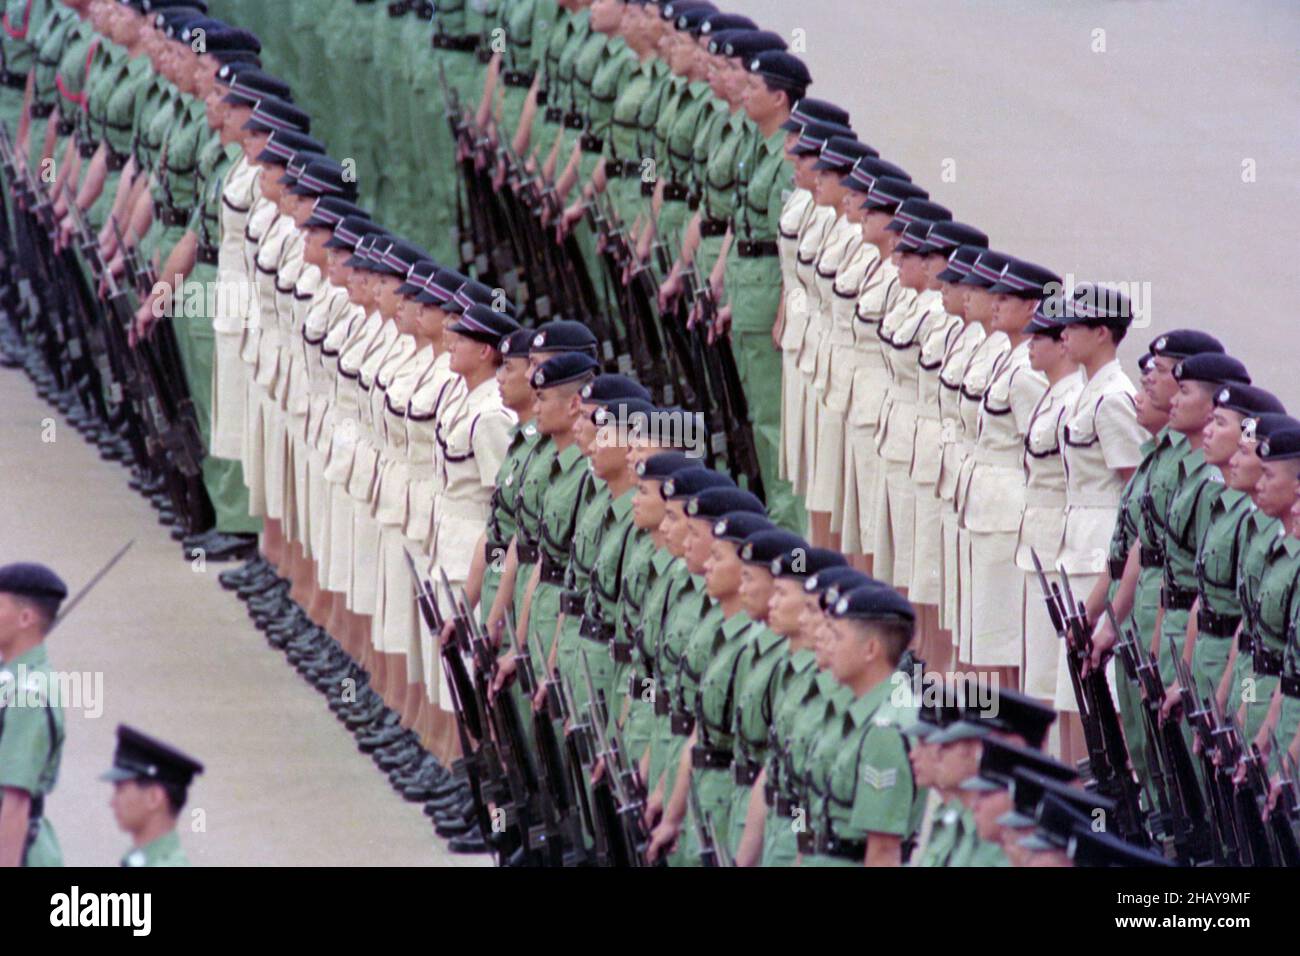 Royal Hong Kong Police 150th Anniversary Parade, at Police Training School, Aberdeen, Hong Kong Date: Summer 1994. Male and female police officers are lined up in “Review Order”.  Commissioner of the RHKP, Mr LI Kwan-ha, took the salute. Stock Photo